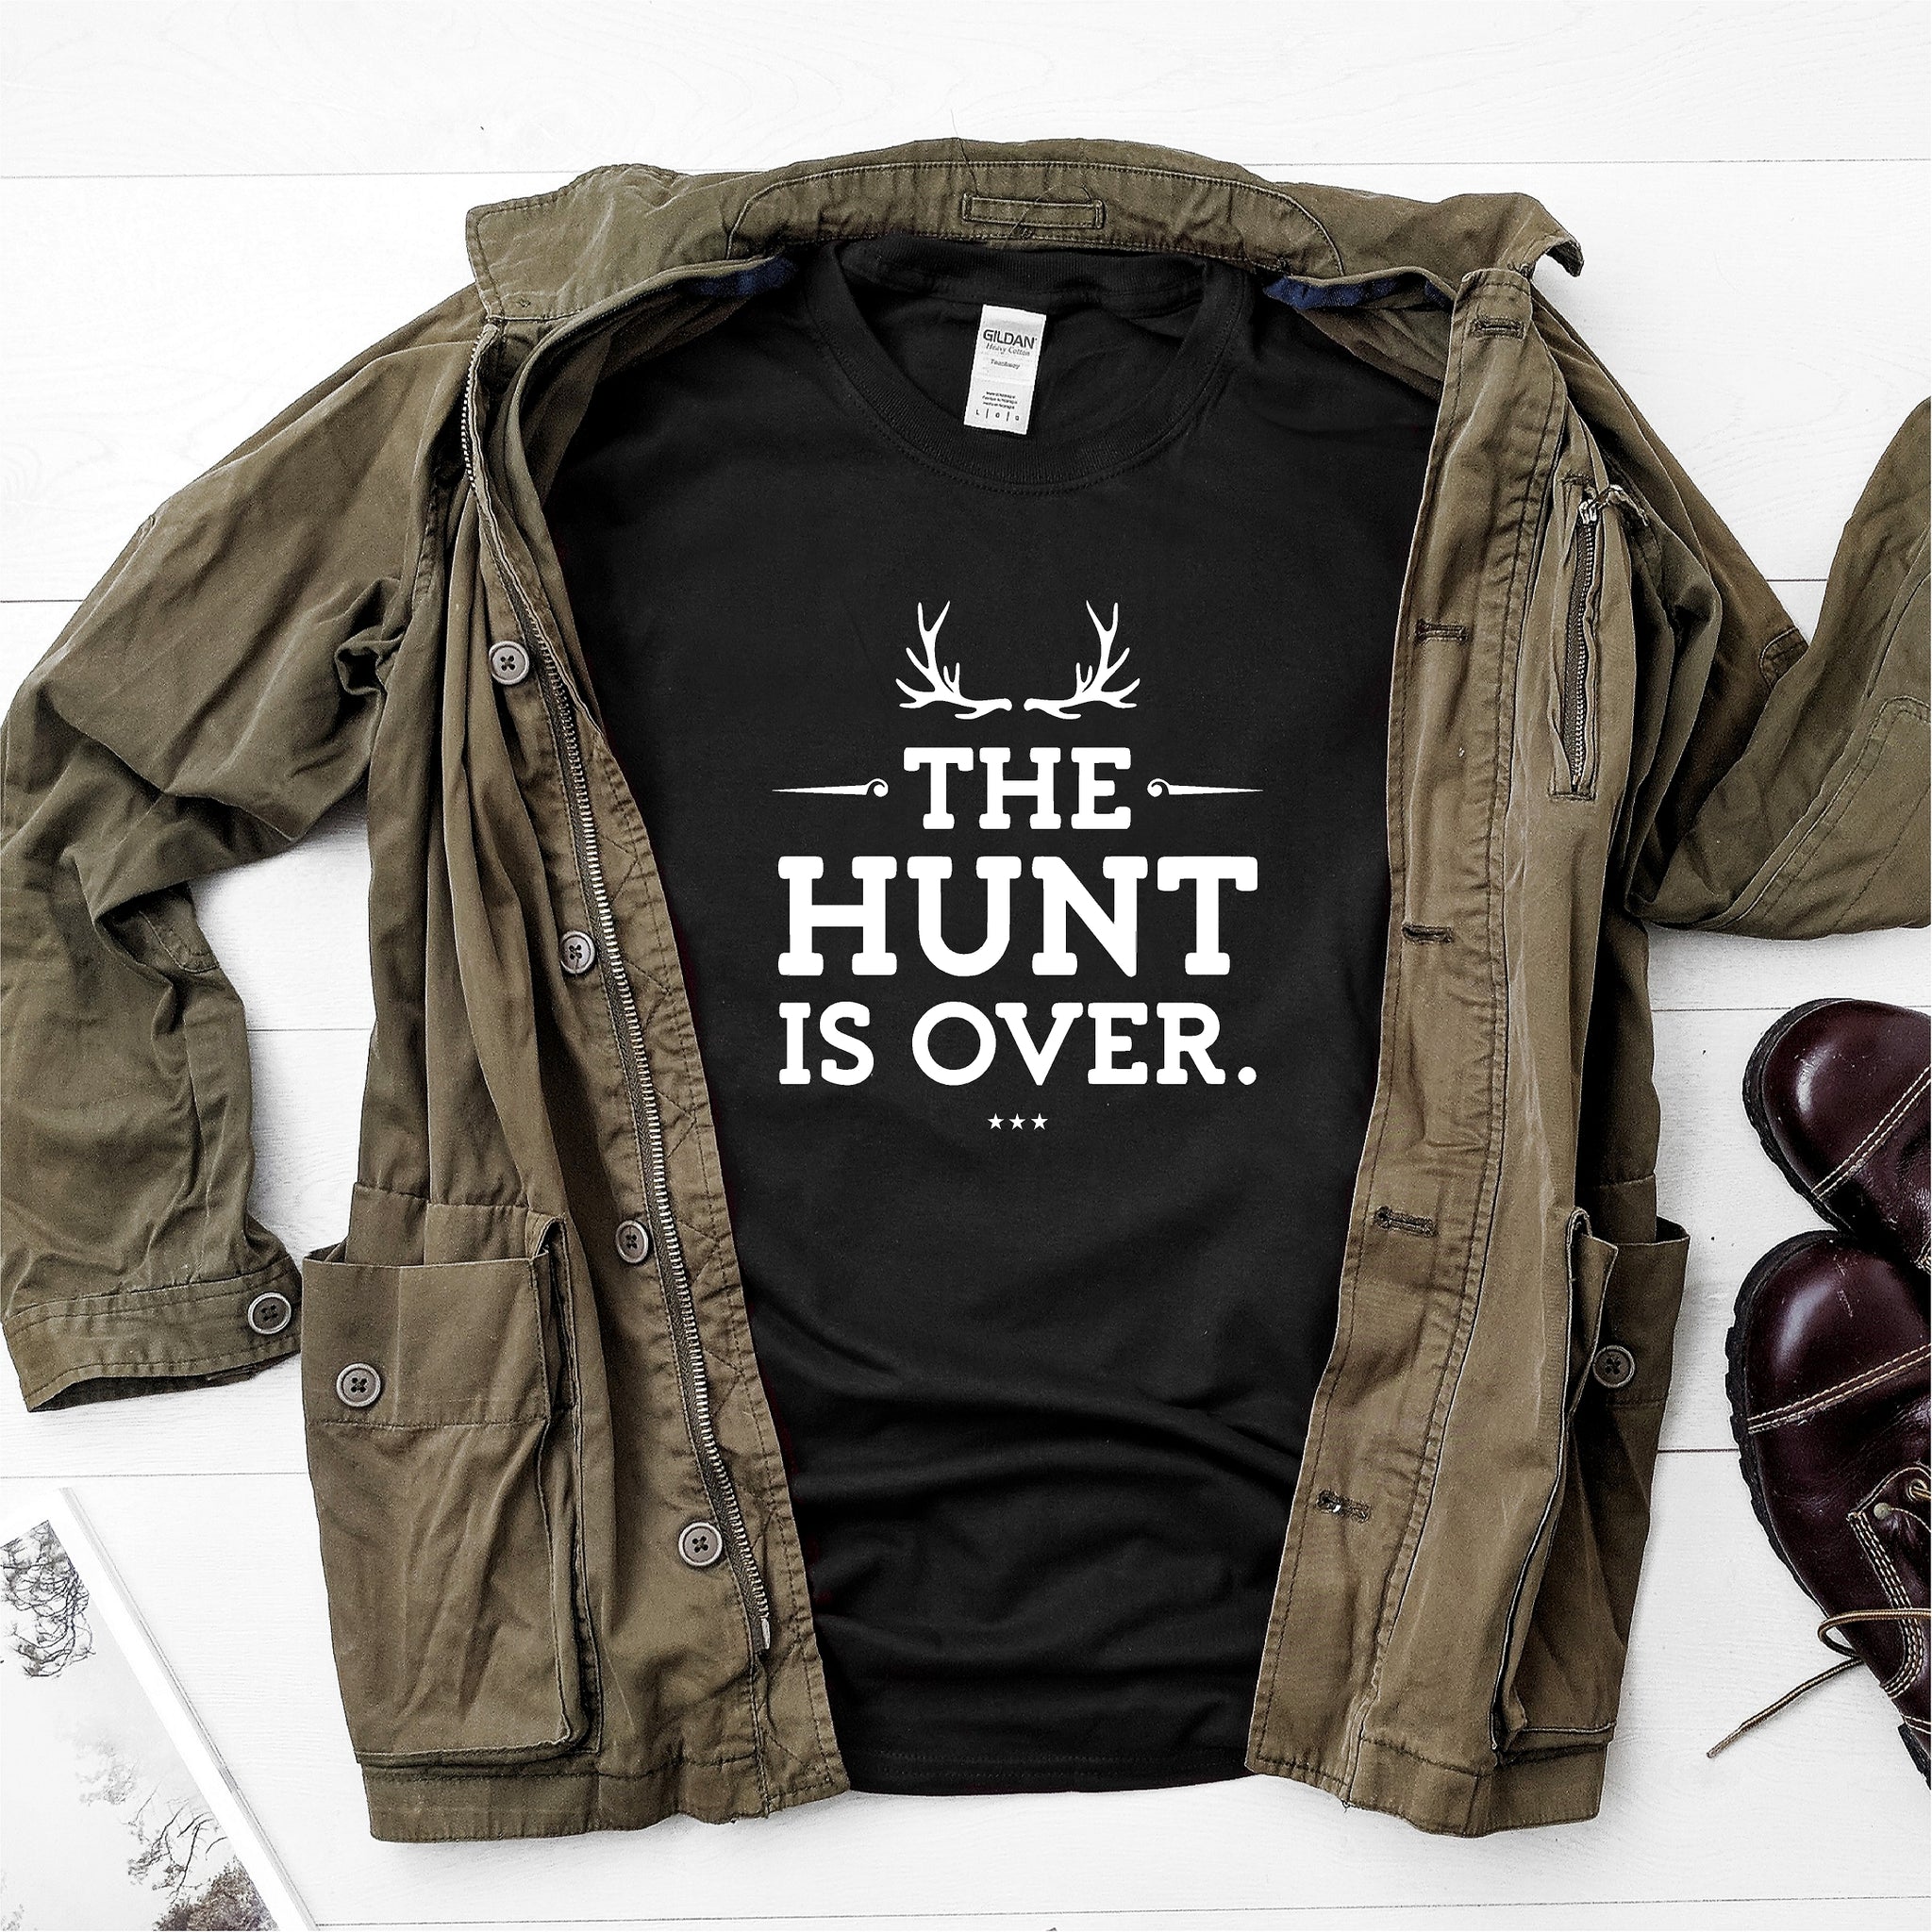 The hunt is over- Ultra Cotton Short Sleeve T-Shirt - DFHM45